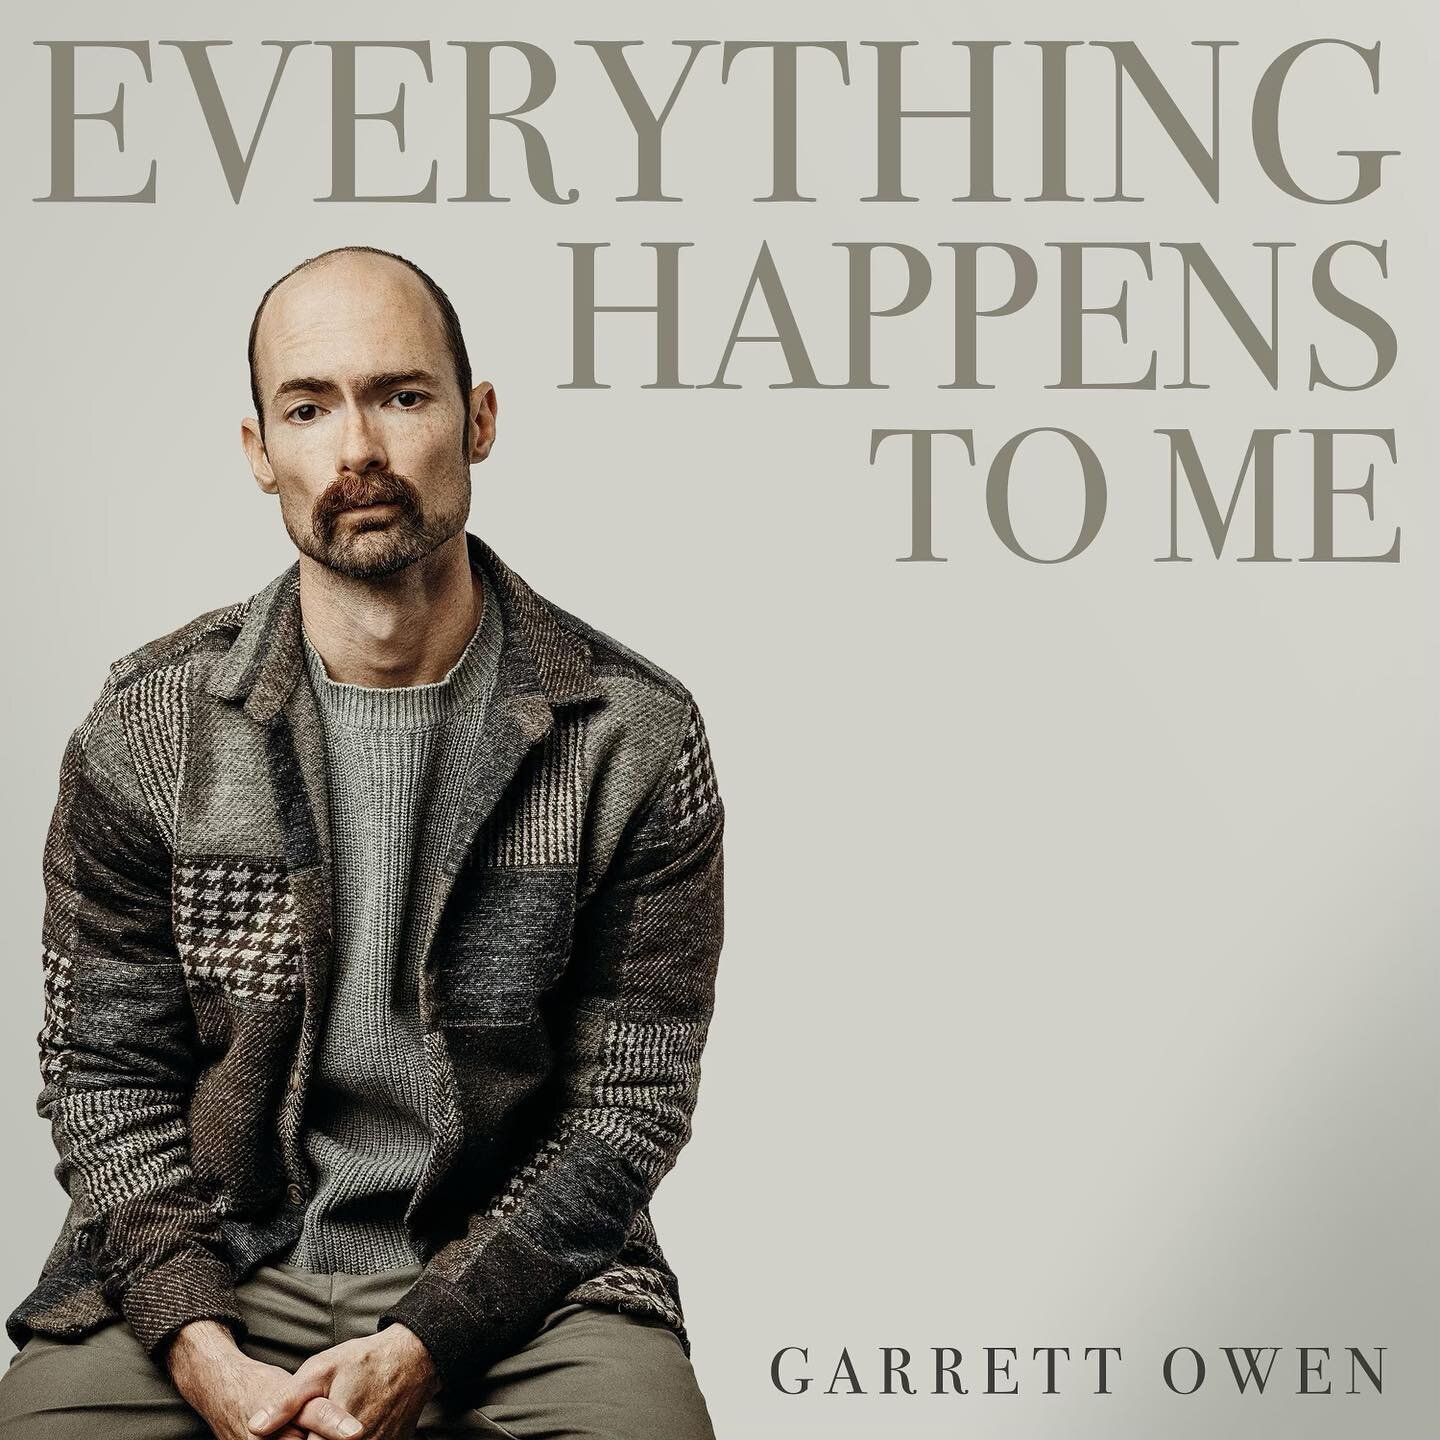 Our good friend @garrettowentx released a new single today! Honored to haves mastered this one, such a great team involved!